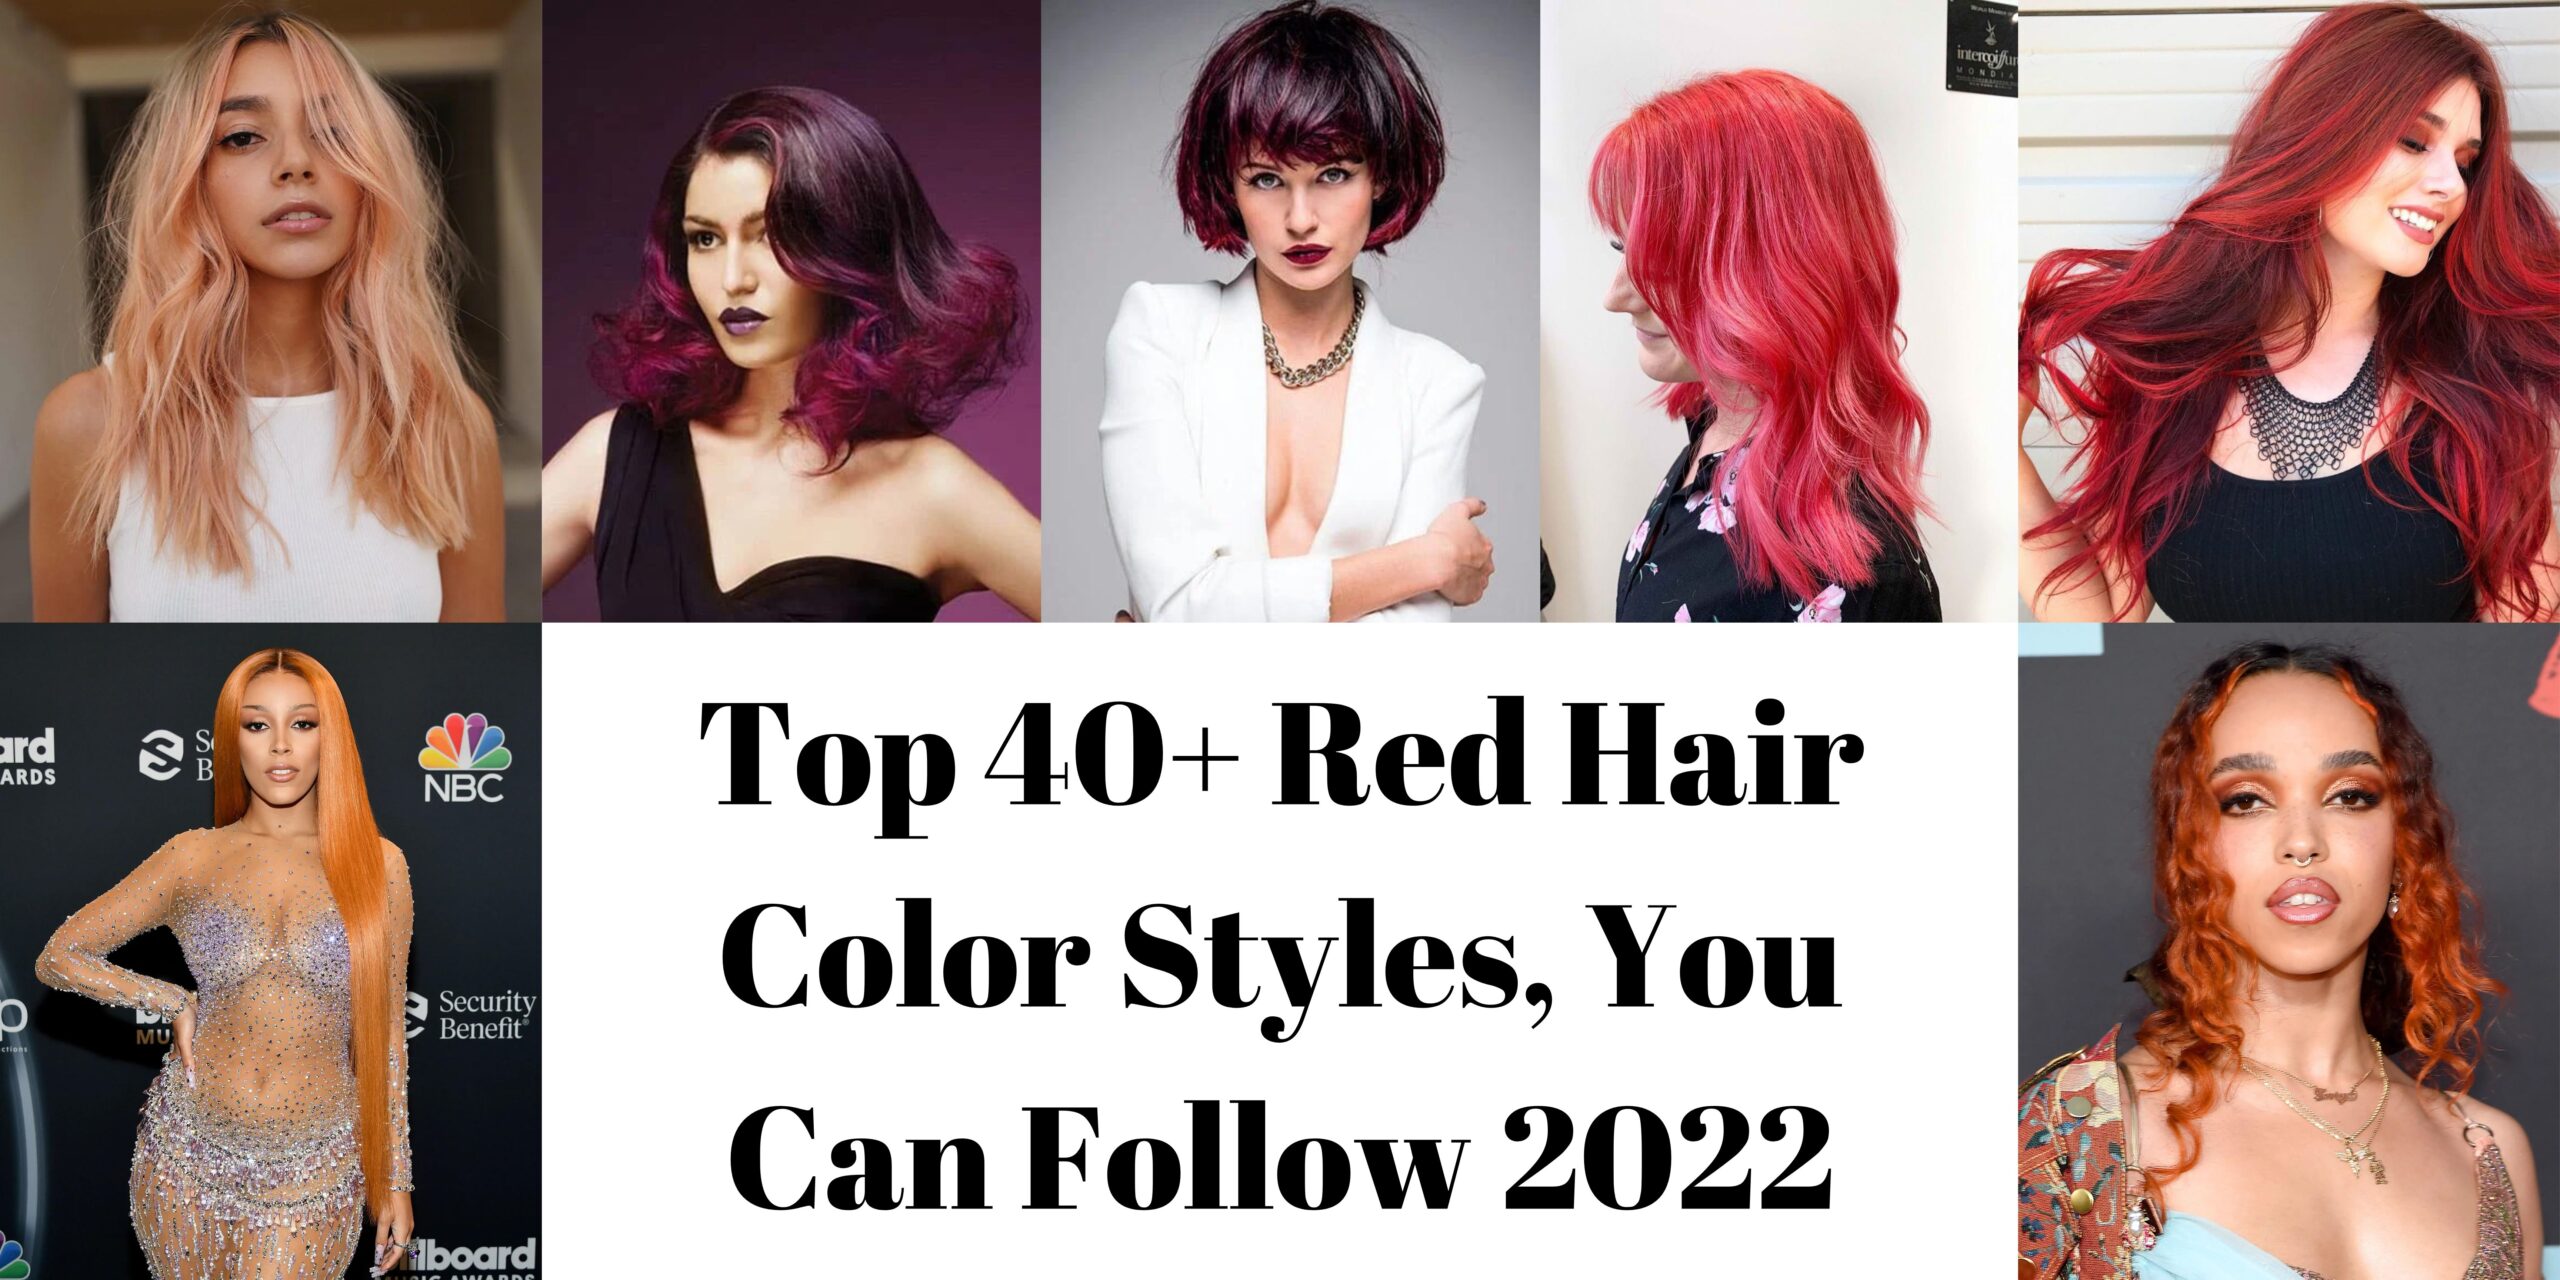 Top 40+ Red Hair Color Styles, You Can Follow 2022